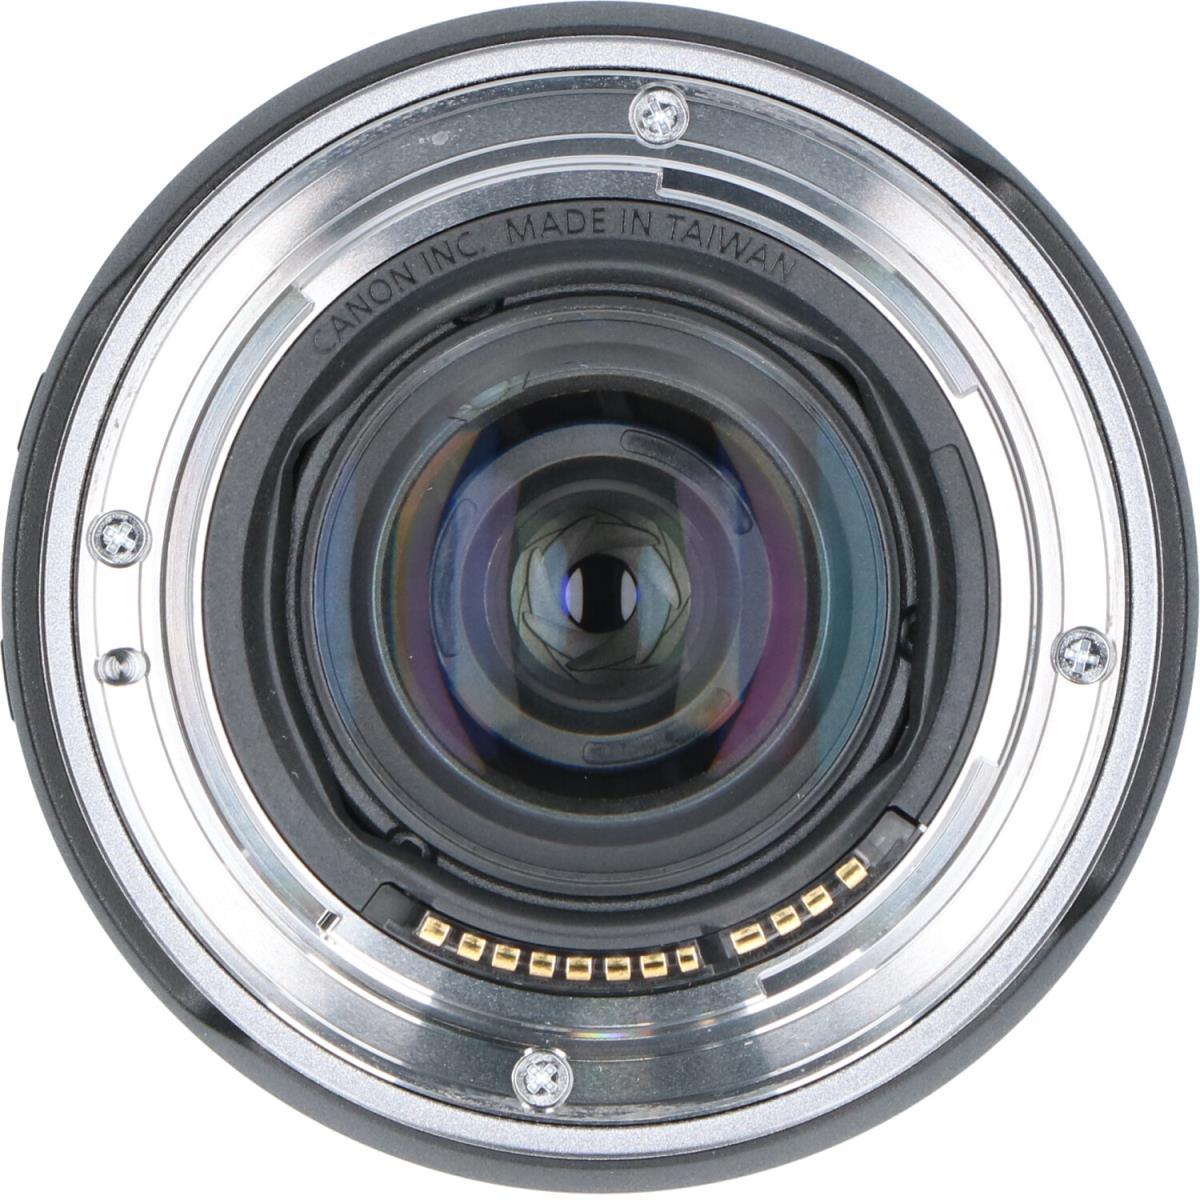 CANON RF24-105mm F4-7.1IS STM